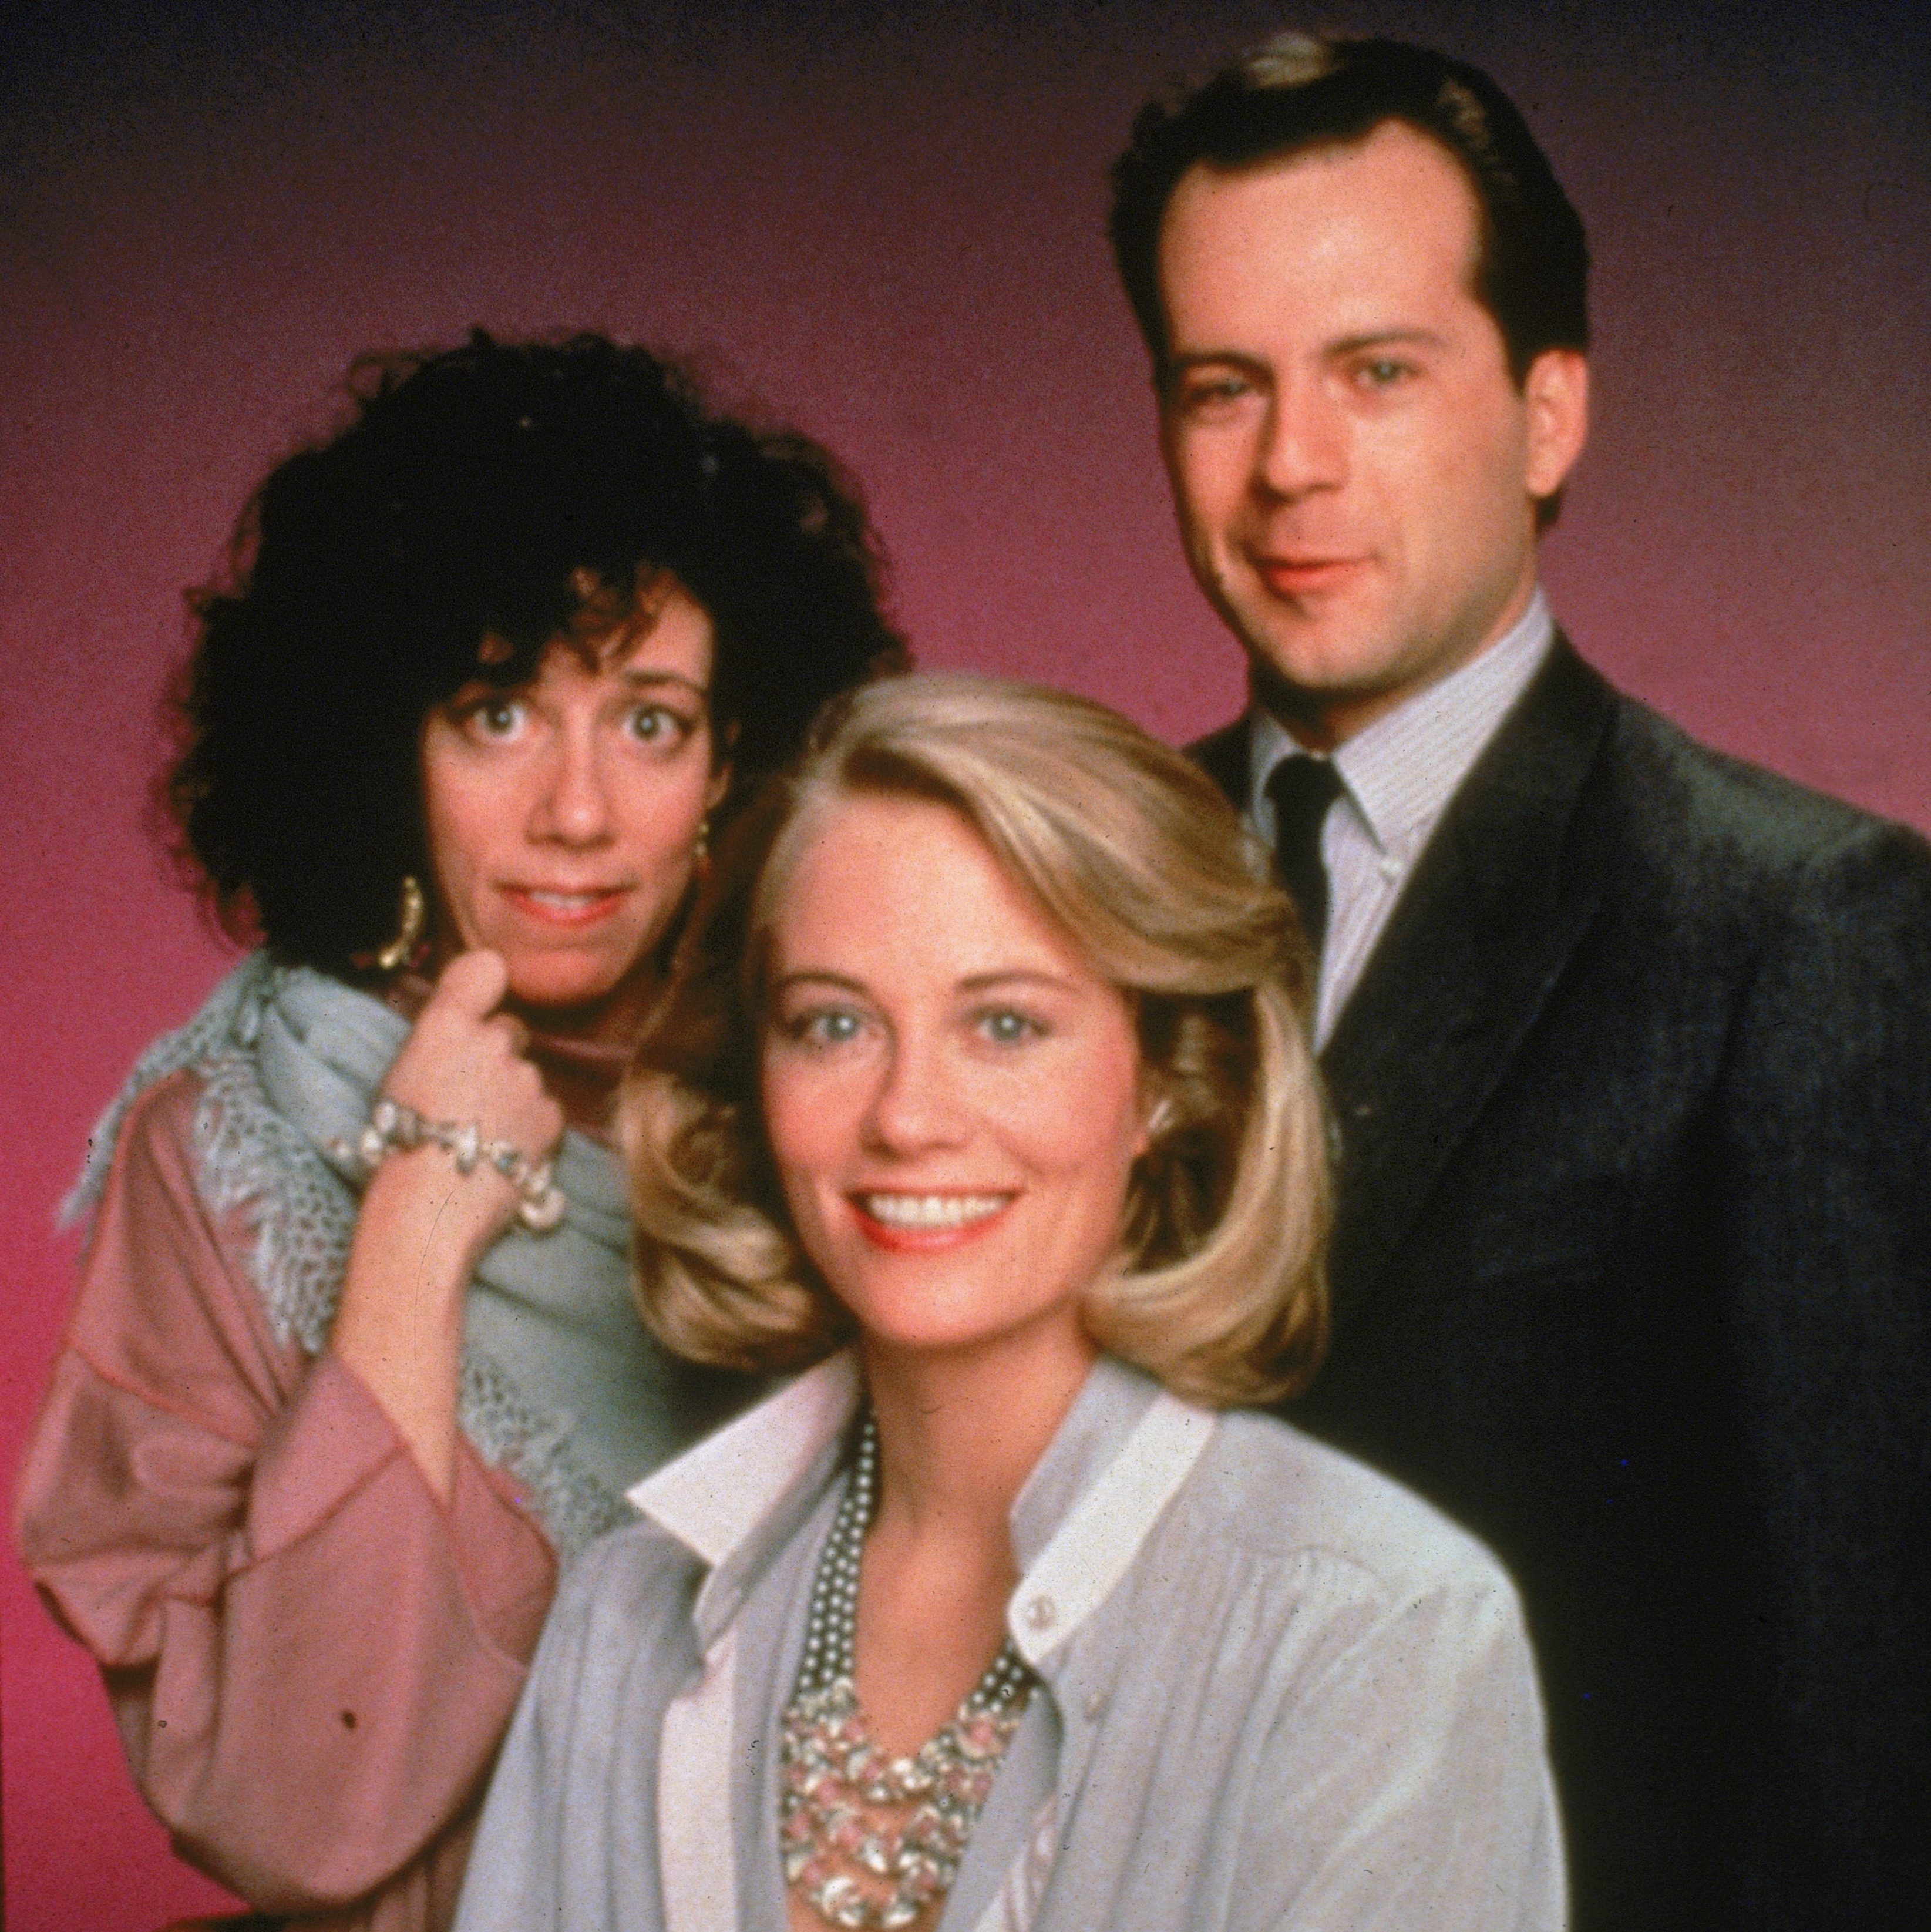 Promotional portrait of the Moonlighting cast, 1986